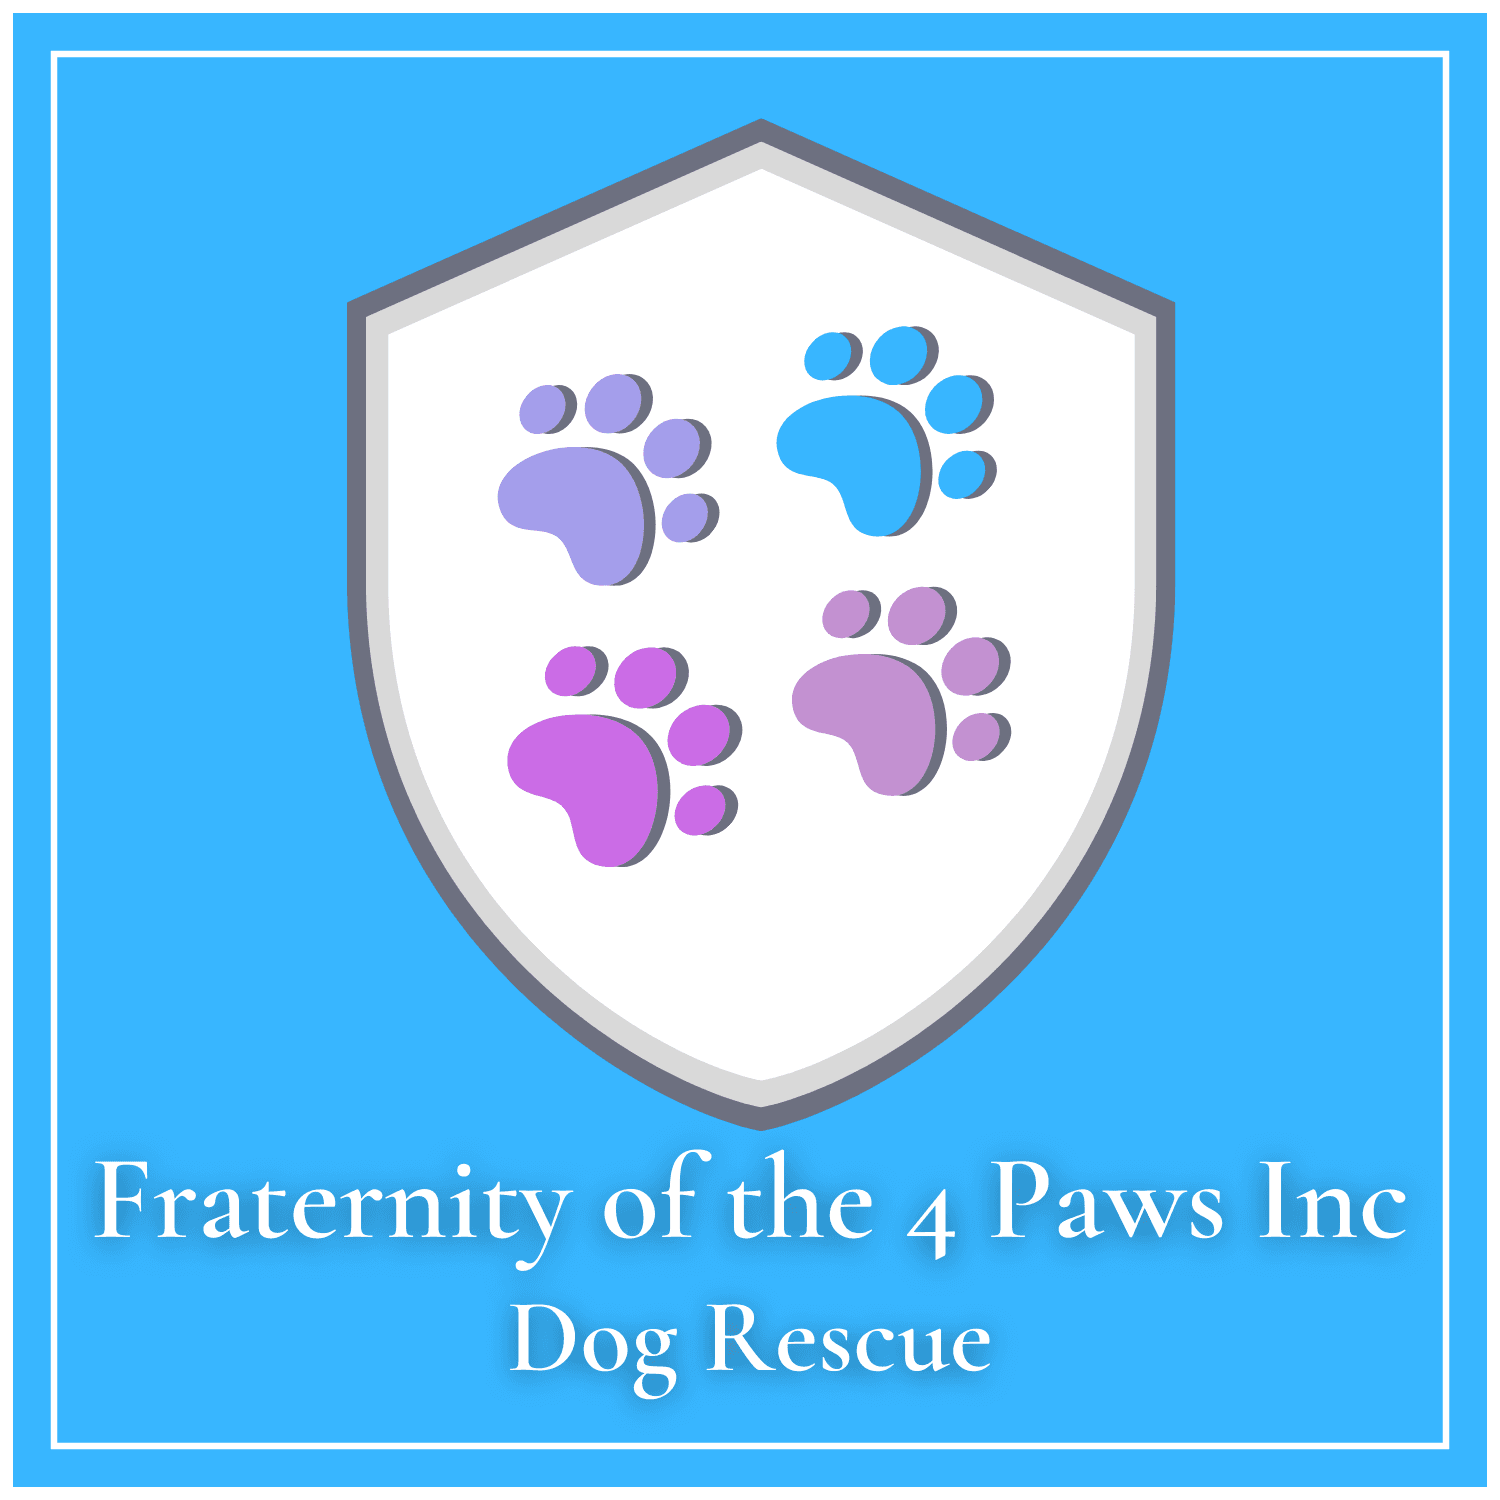 Fraternity of the 4 Paws Logo